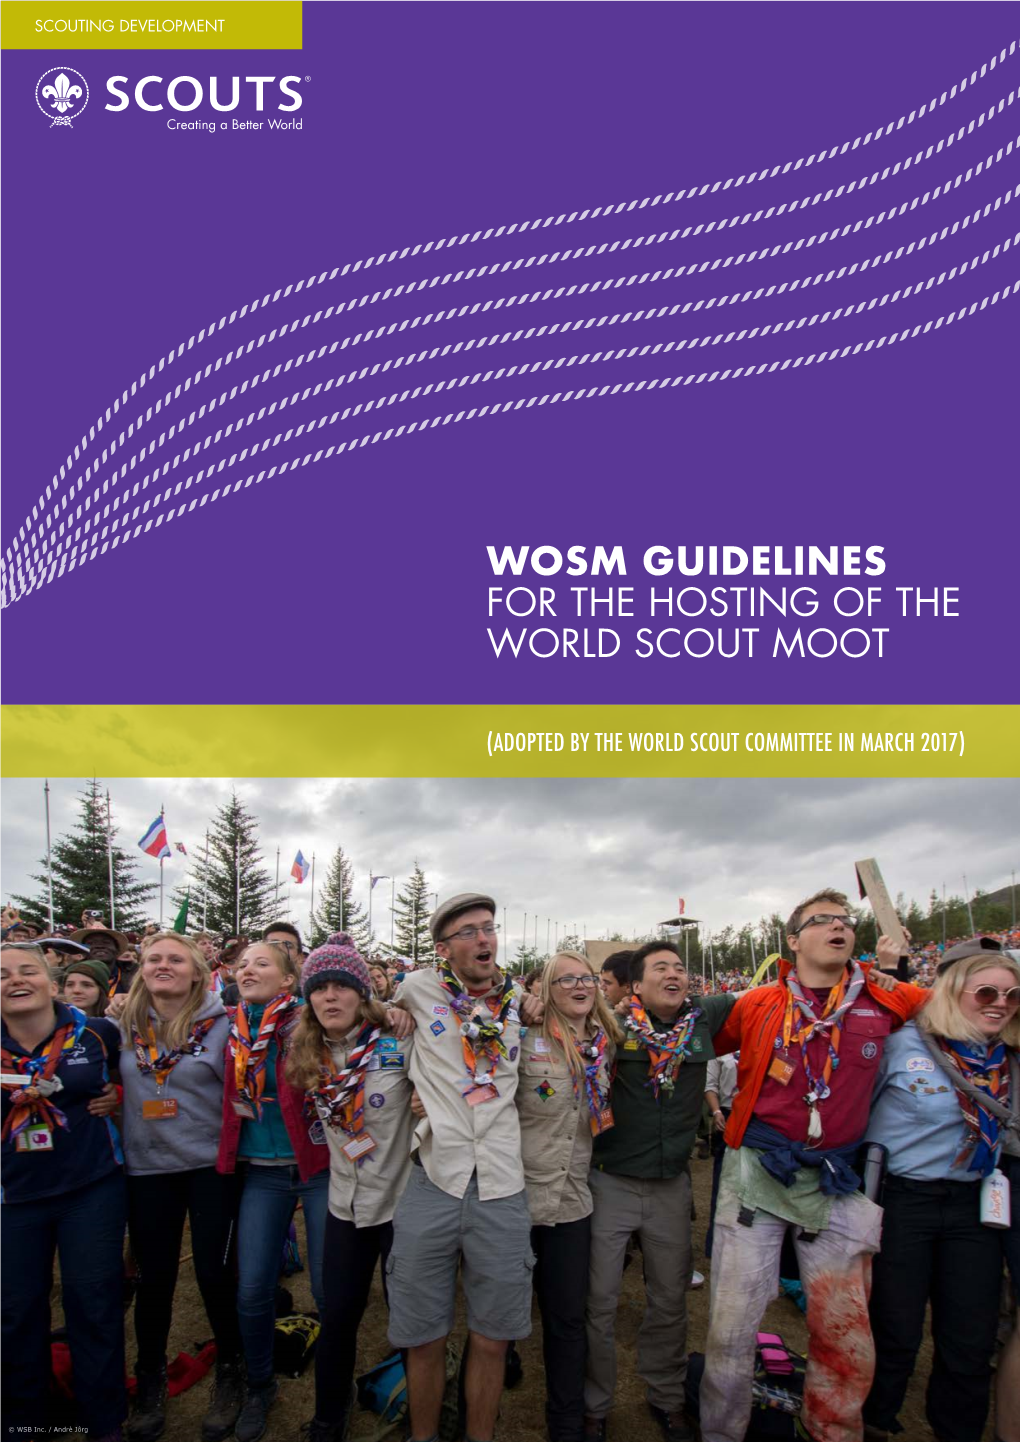 Wosm Guidelines for the Hosting of the World Scout Moot